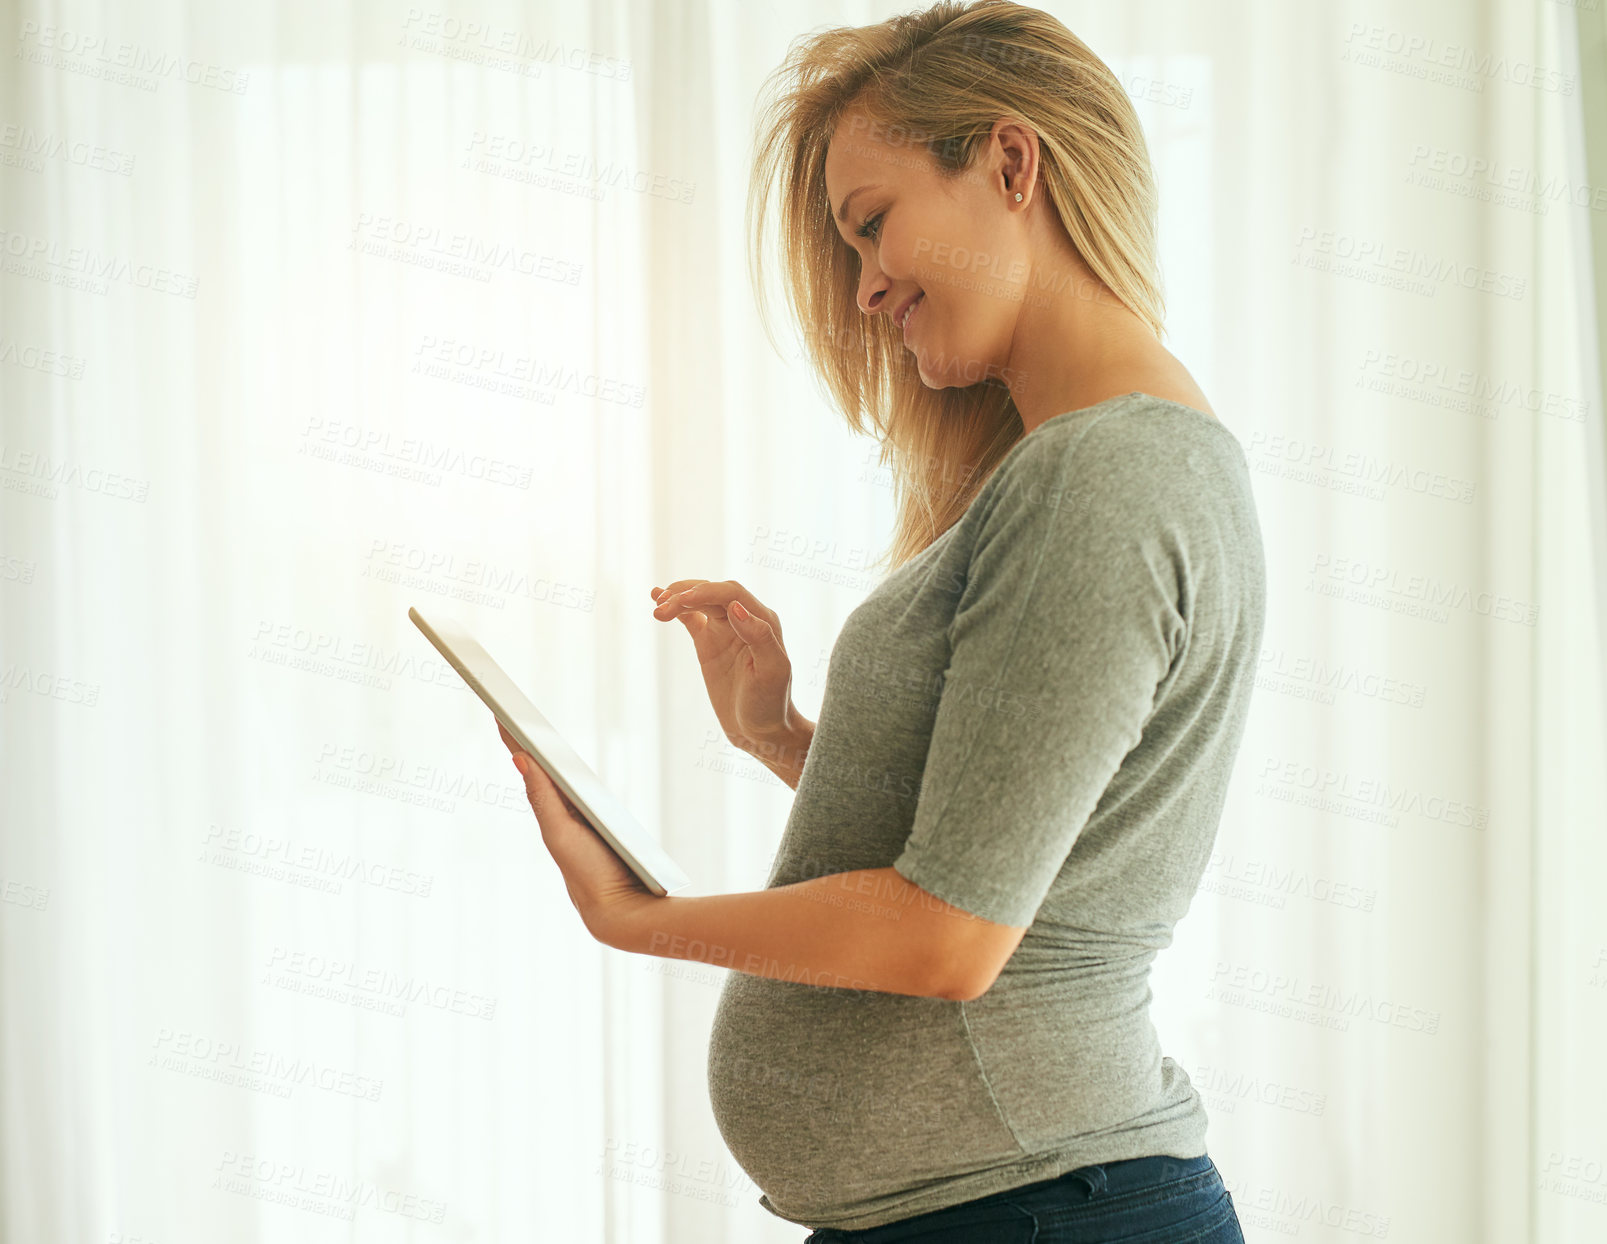 Buy stock photo Cropped shot of a pregnant woman using her digital tablet at home